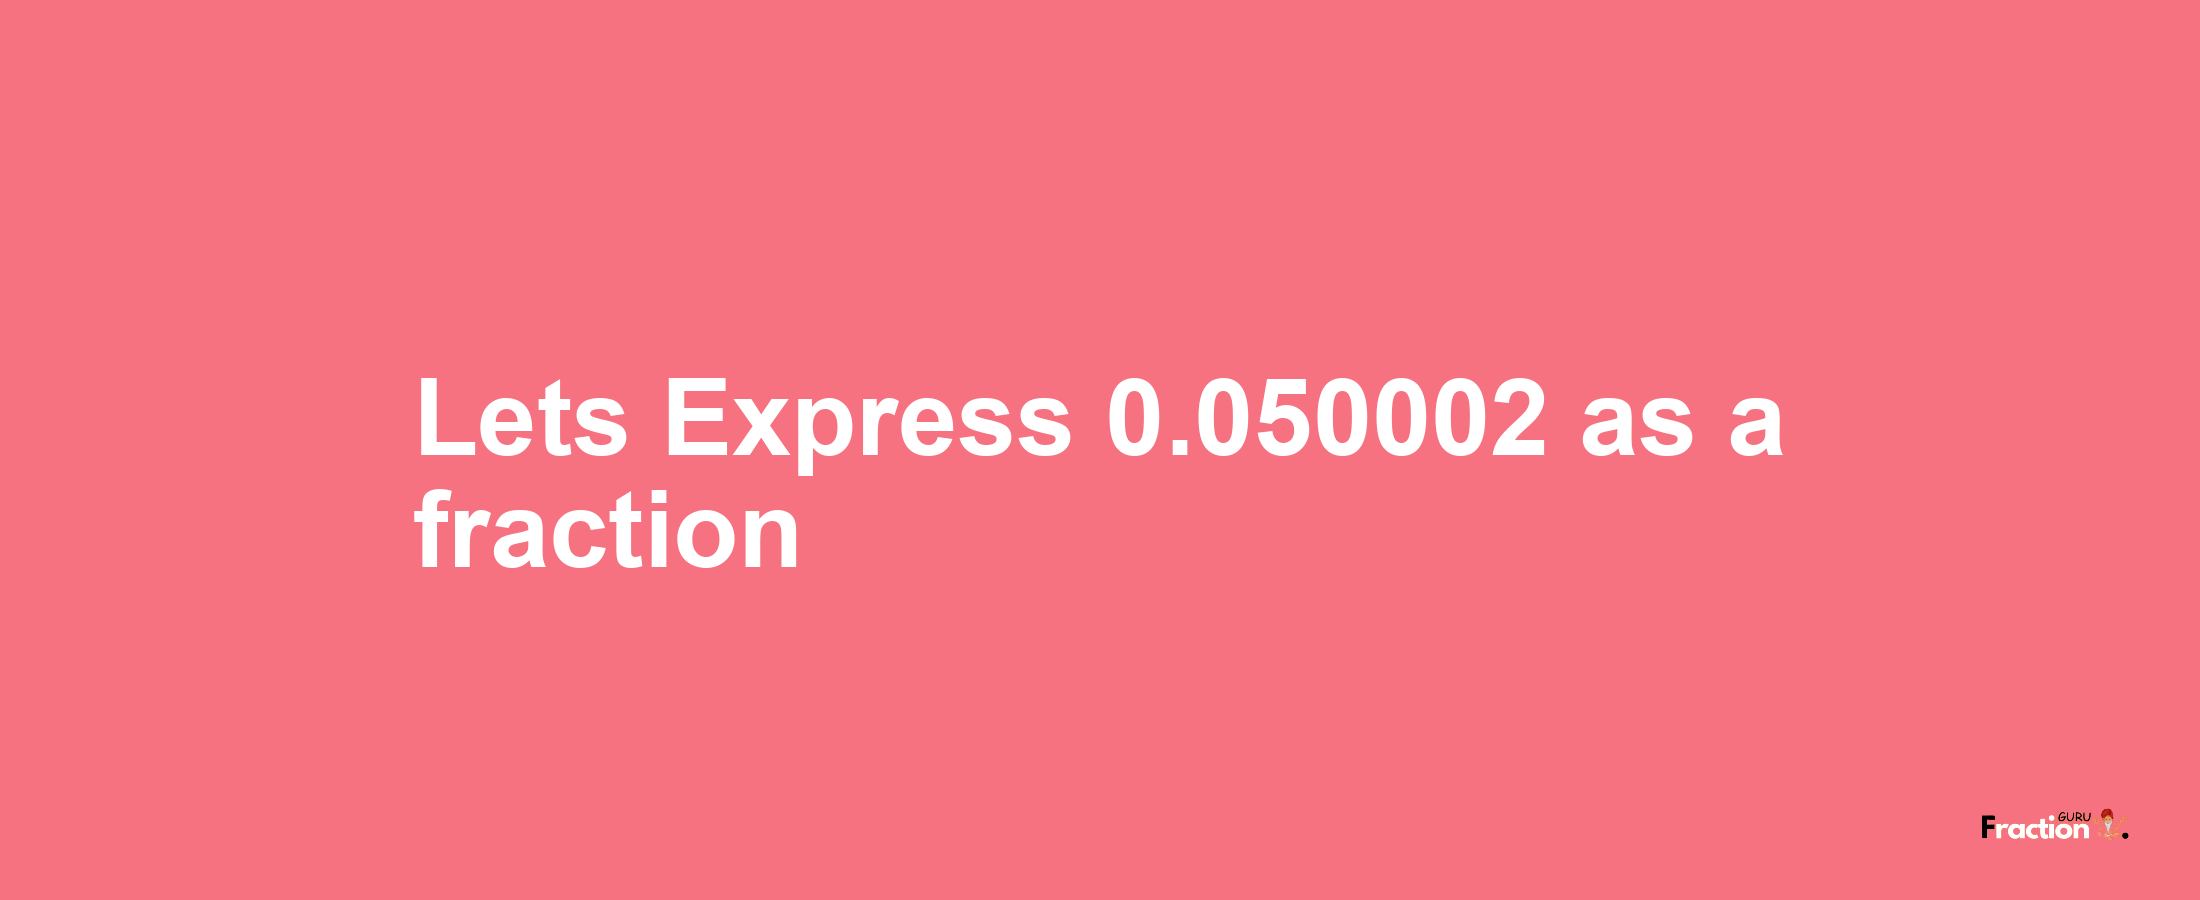 Lets Express 0.050002 as afraction